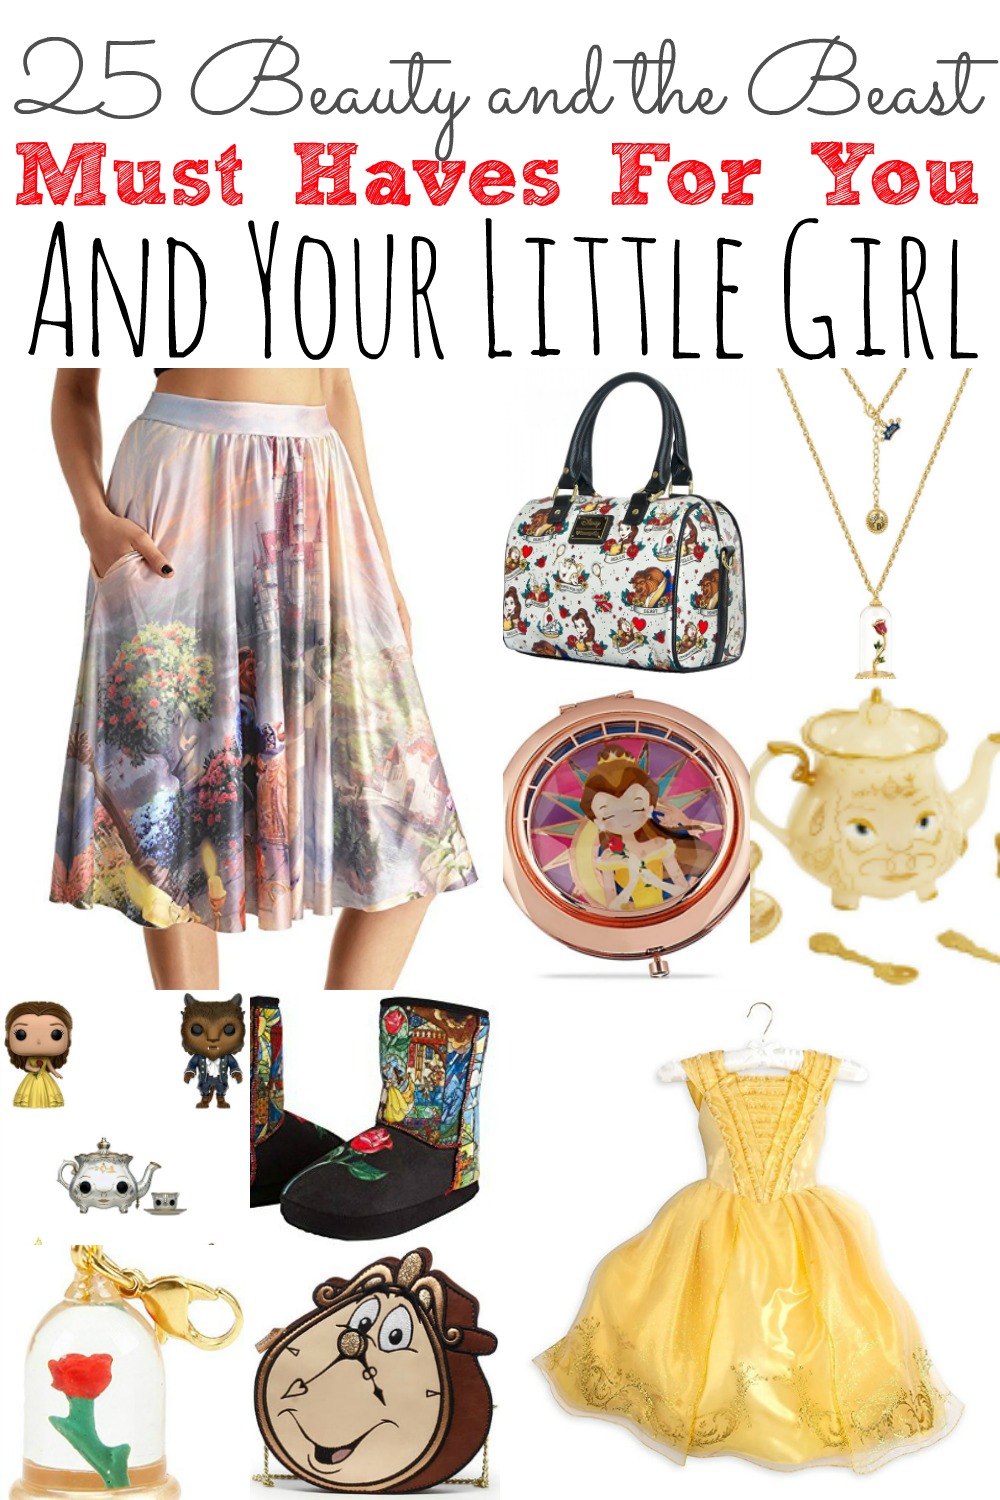 Beauty and the Beast Must Haves For You and Your Little Girl